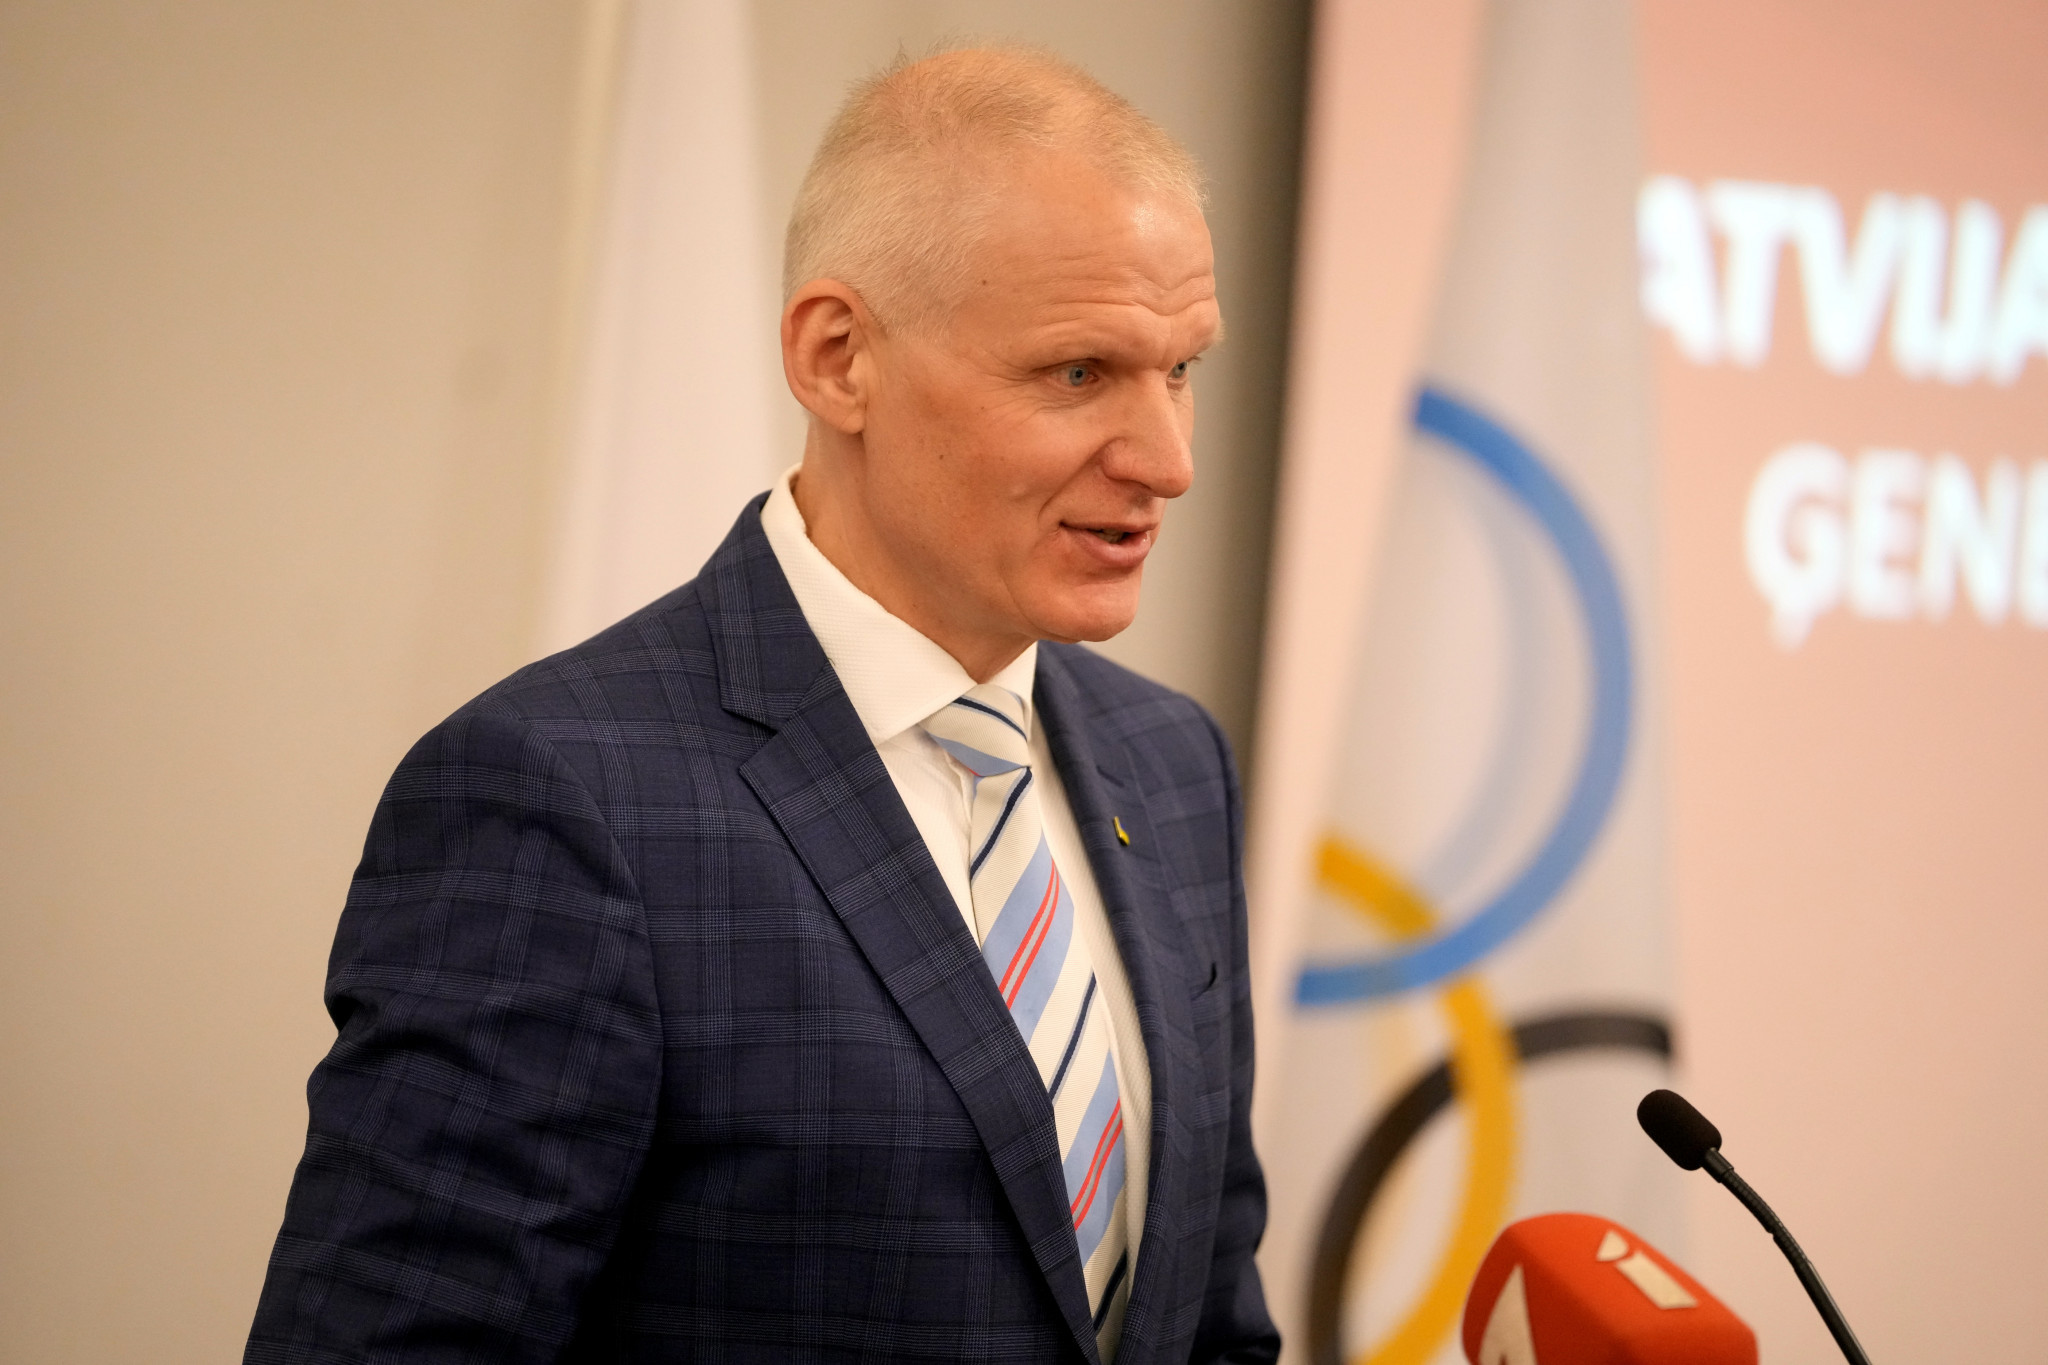 Latvian Olympic Committee President explains state funding controversy for athletes participating at events with Russia